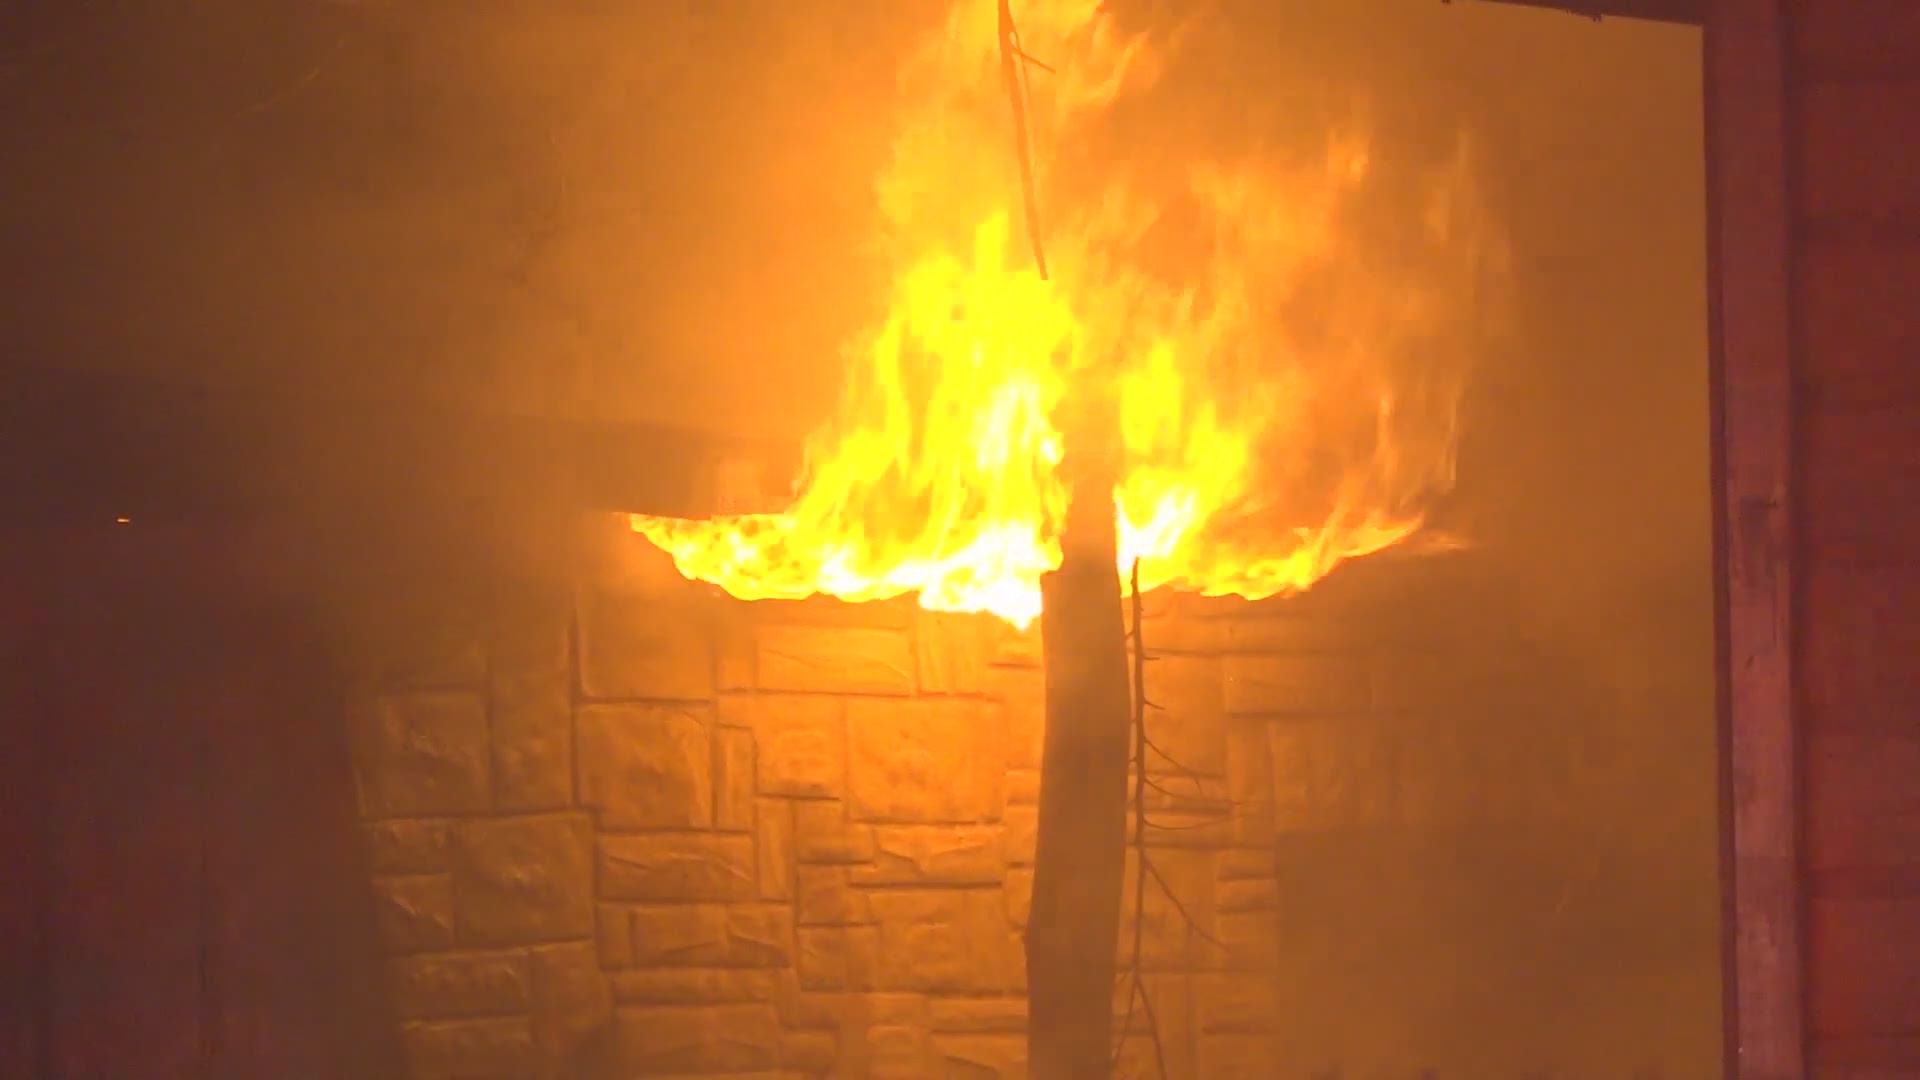 An arson investigation is underway after a Vietnam veteran said something was thrown through his window which set his northeast Houston home on fire.